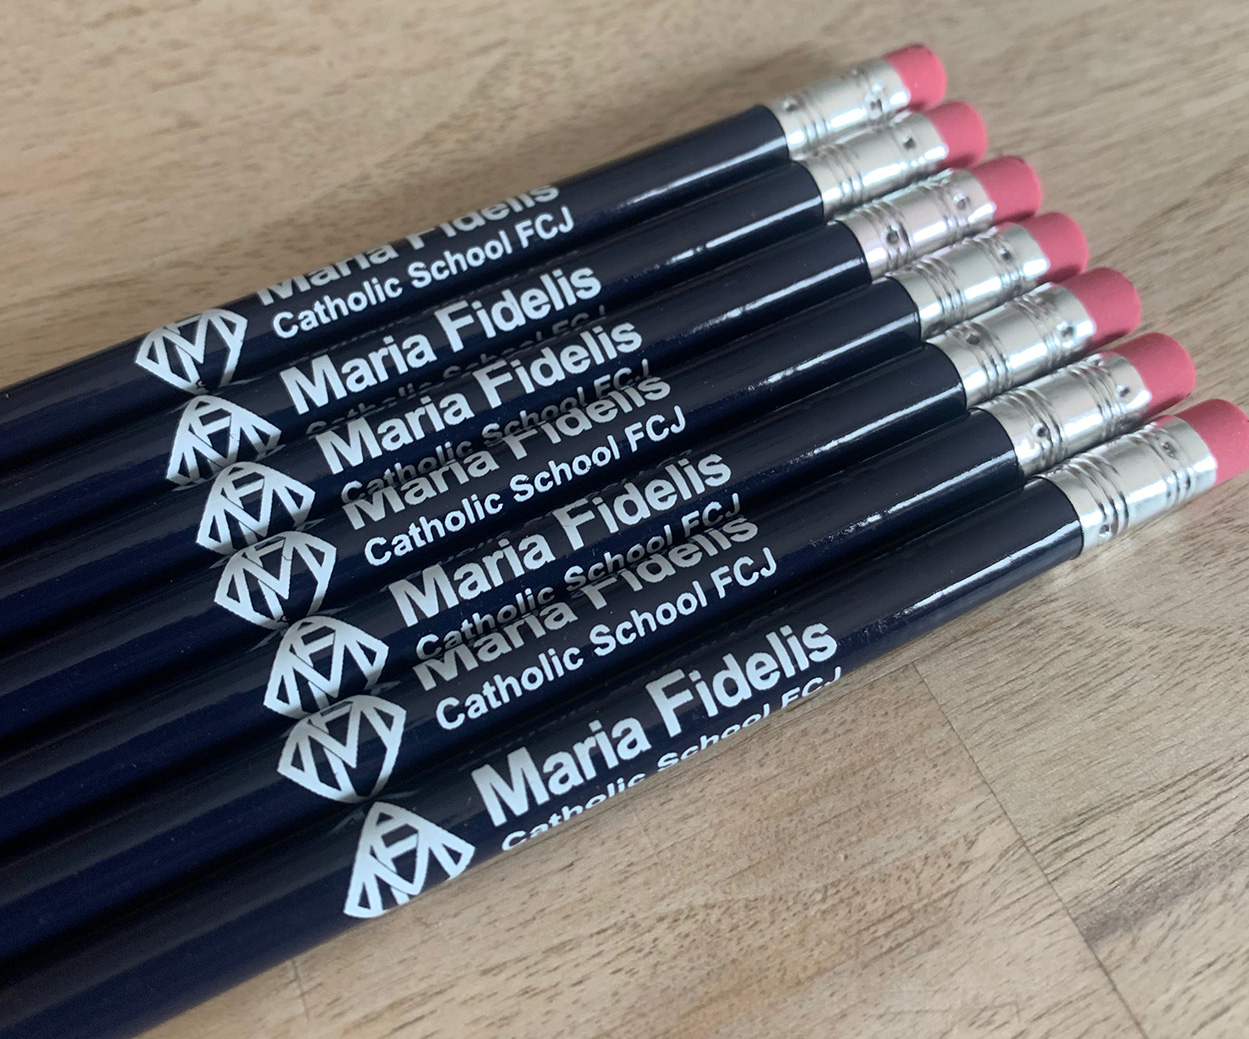 printed pens and pencils for schools - with school logo brand